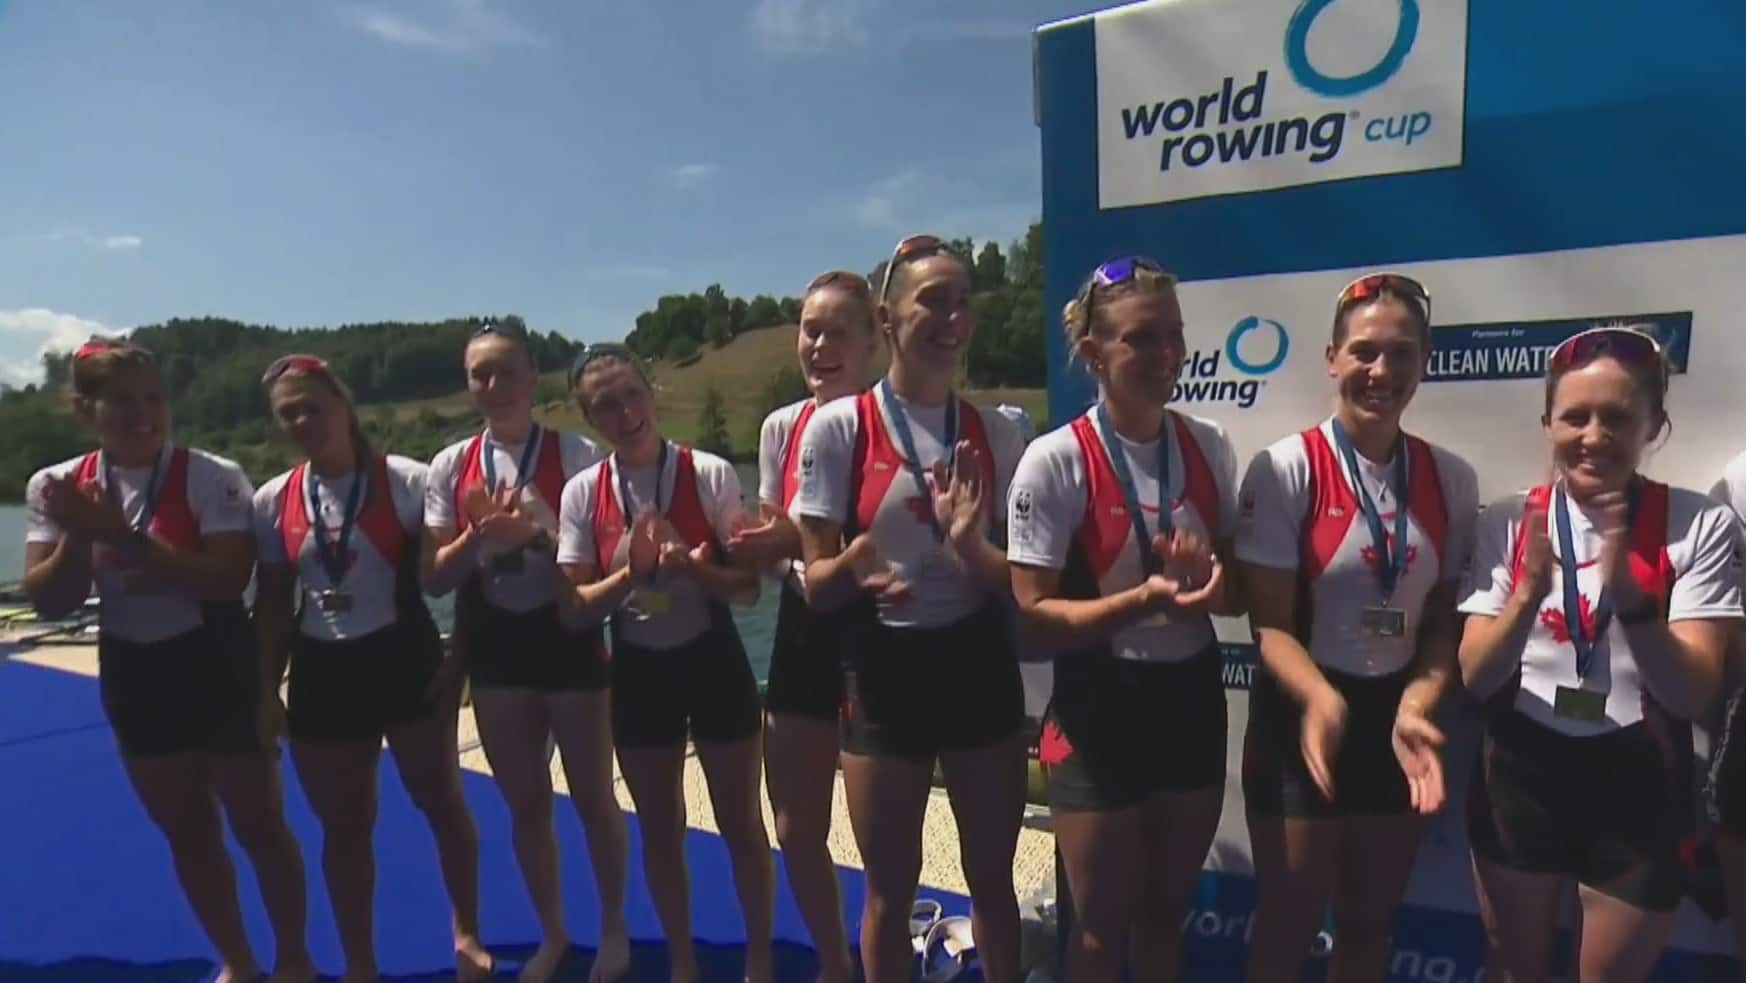 canadian womens 8 team claims silver at world cup rowing event in switzerland